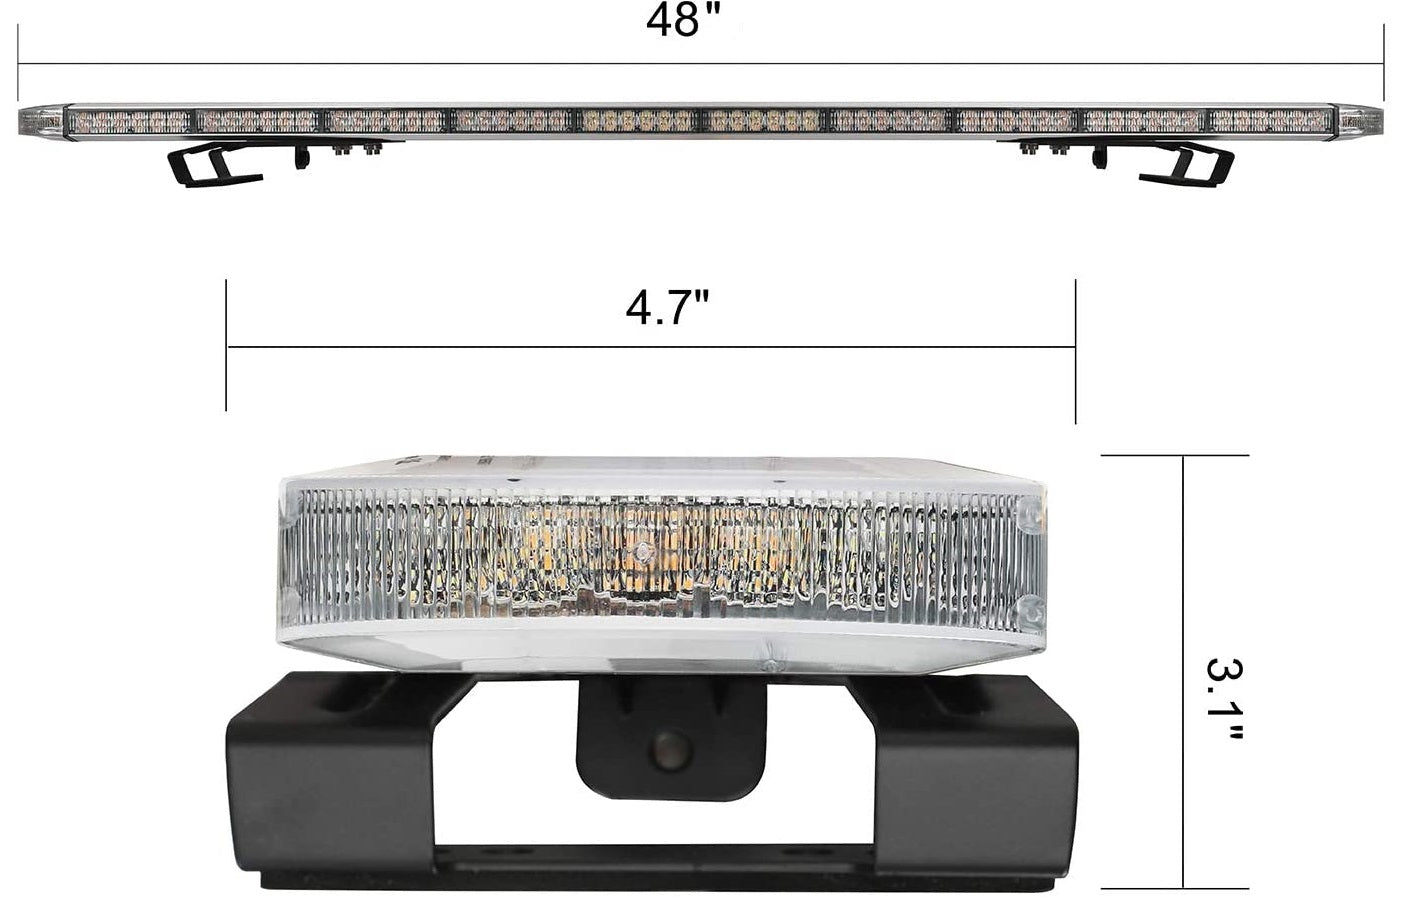 57" X1 Full Size LED Rooftop Warning Emergency Light Bar with Work Light